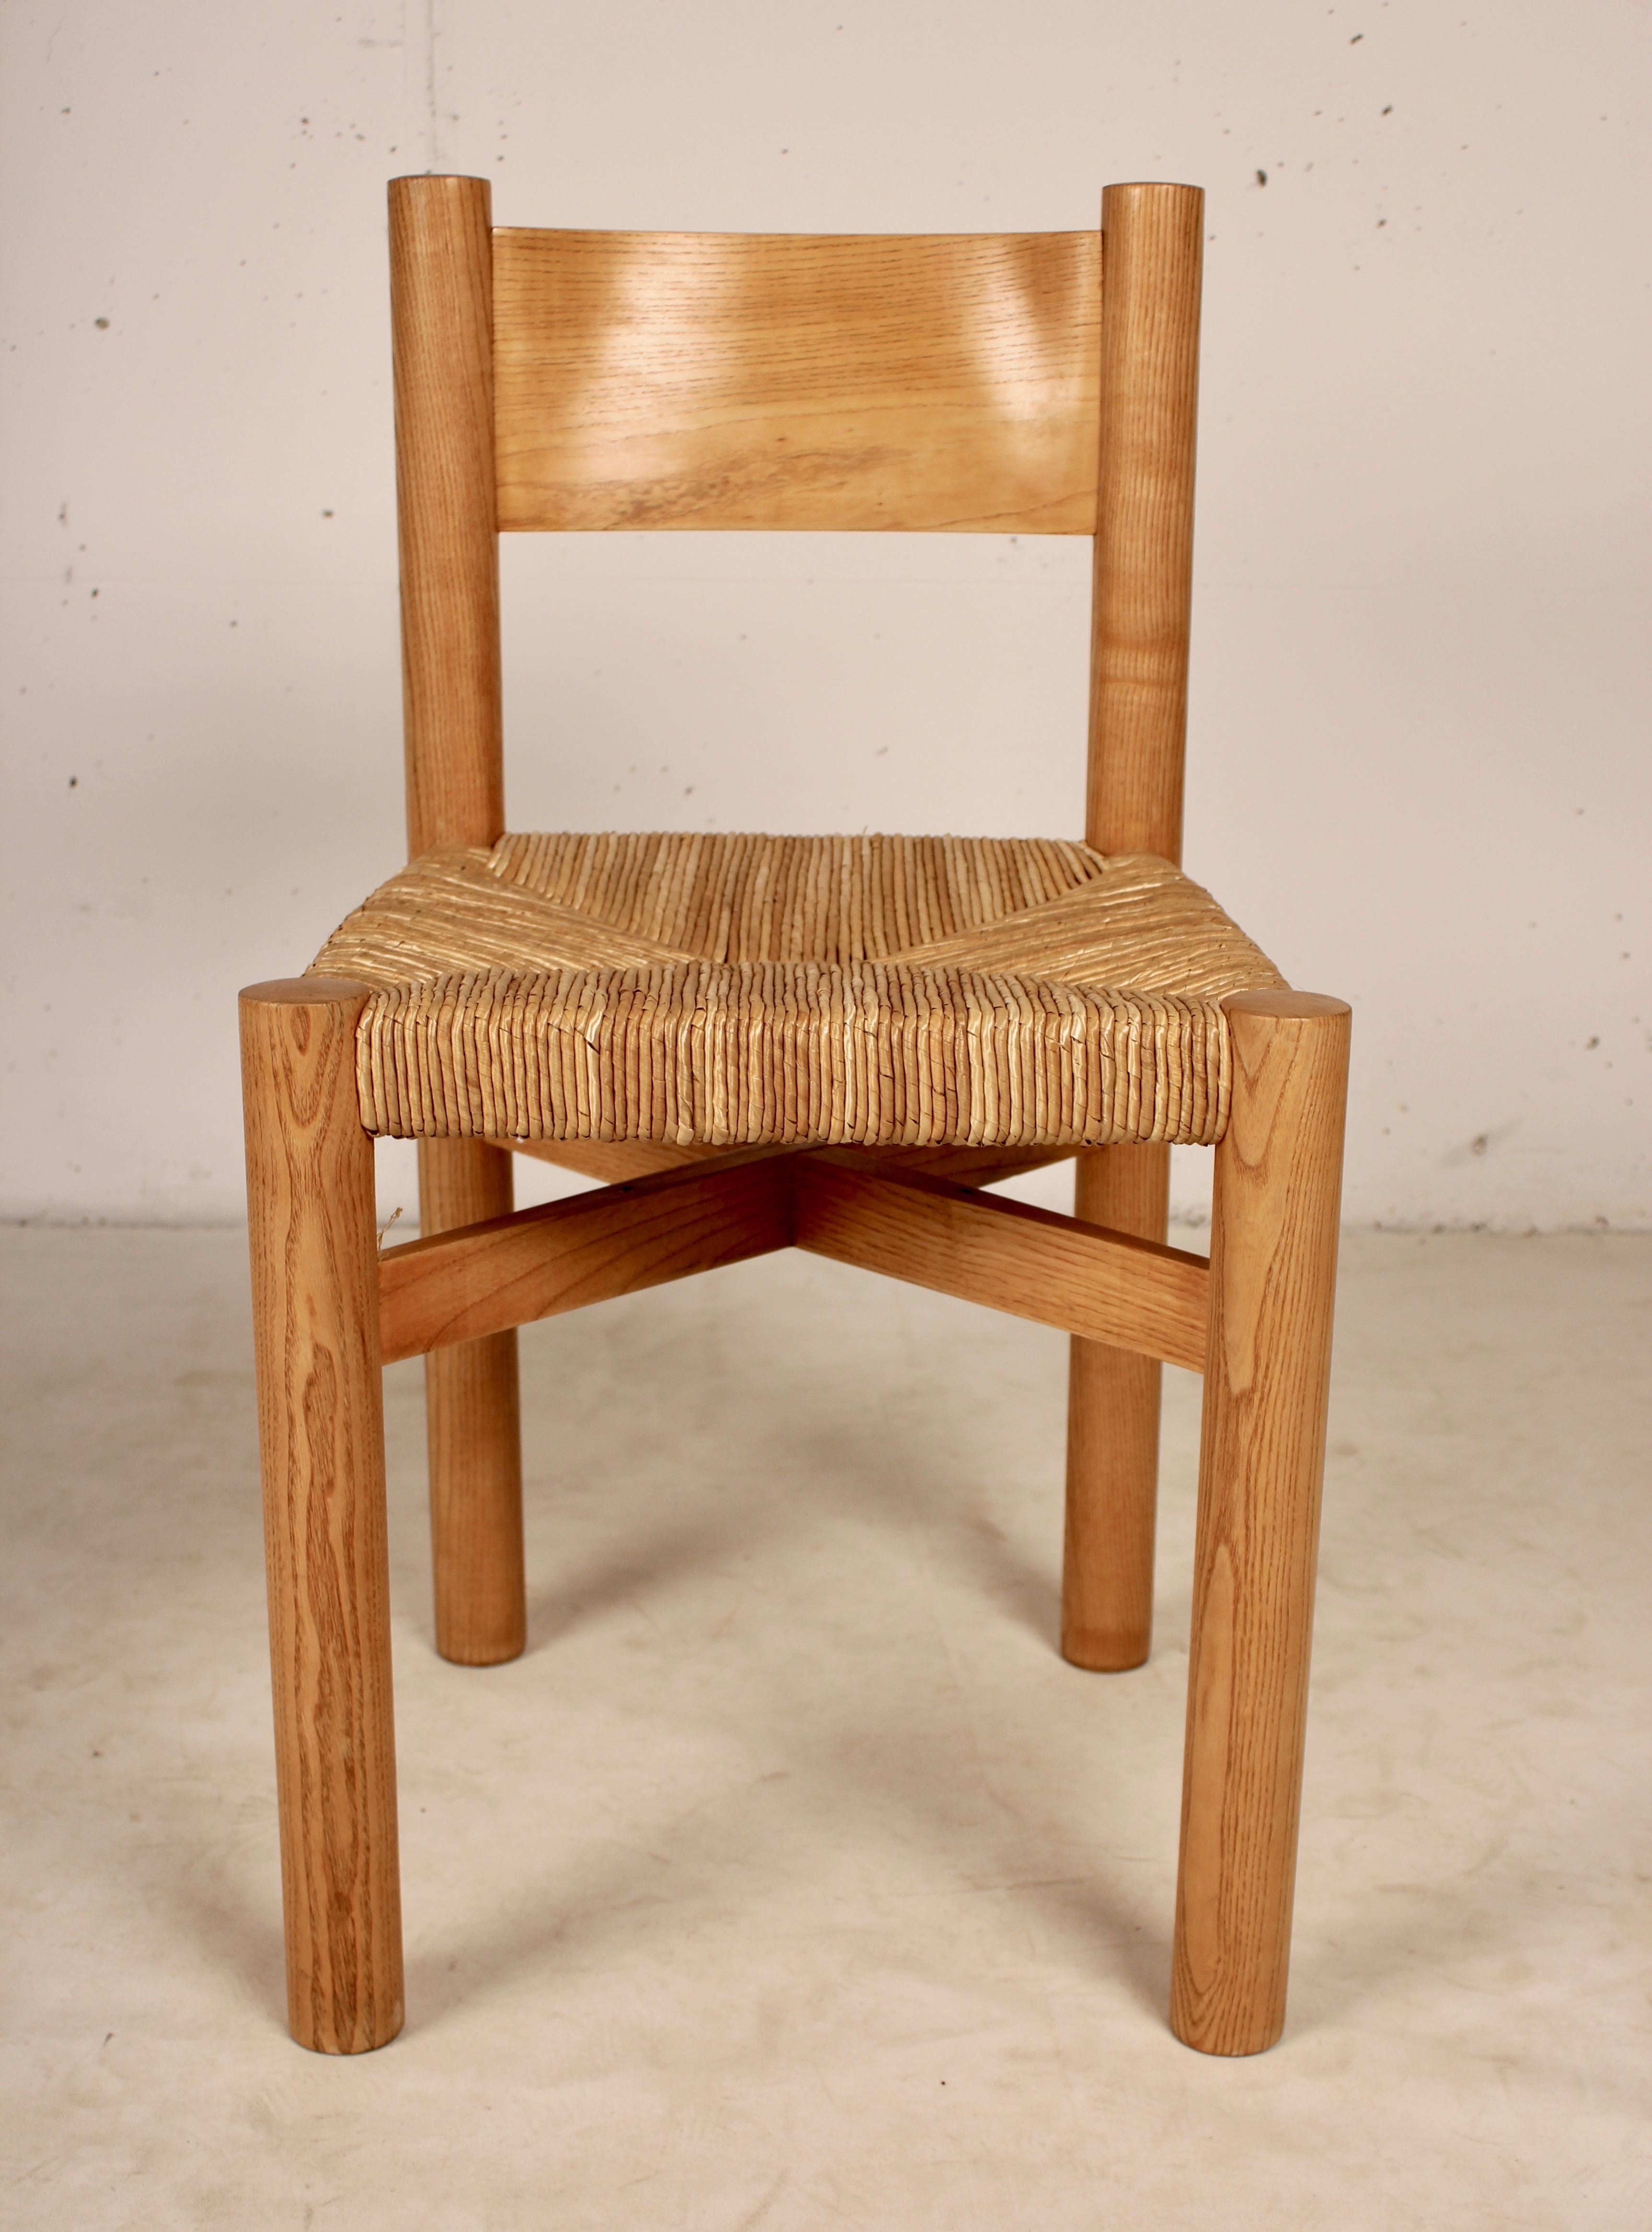 Pine Charlotte Perriand Méribel Chair for Steph Simon, 1960s